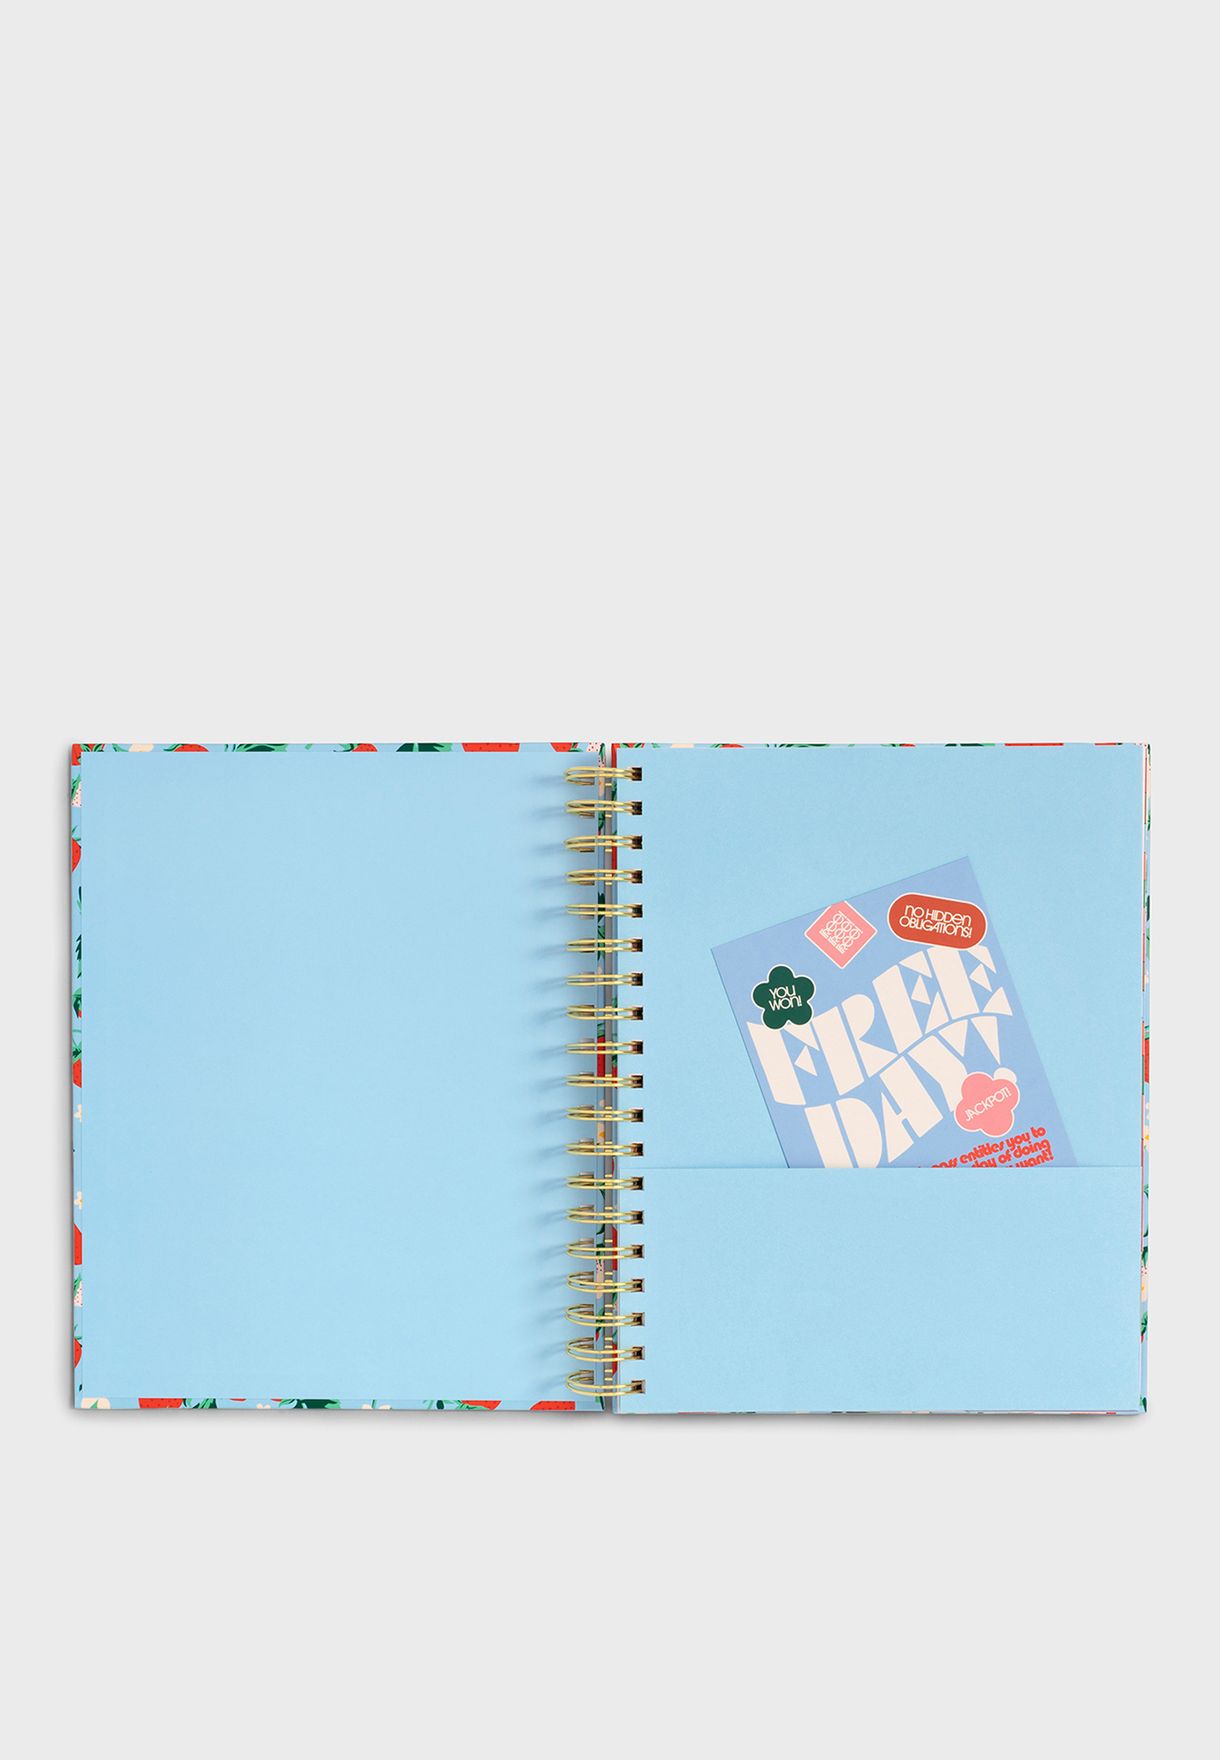 17-Month Large Planner - Strawberry Field